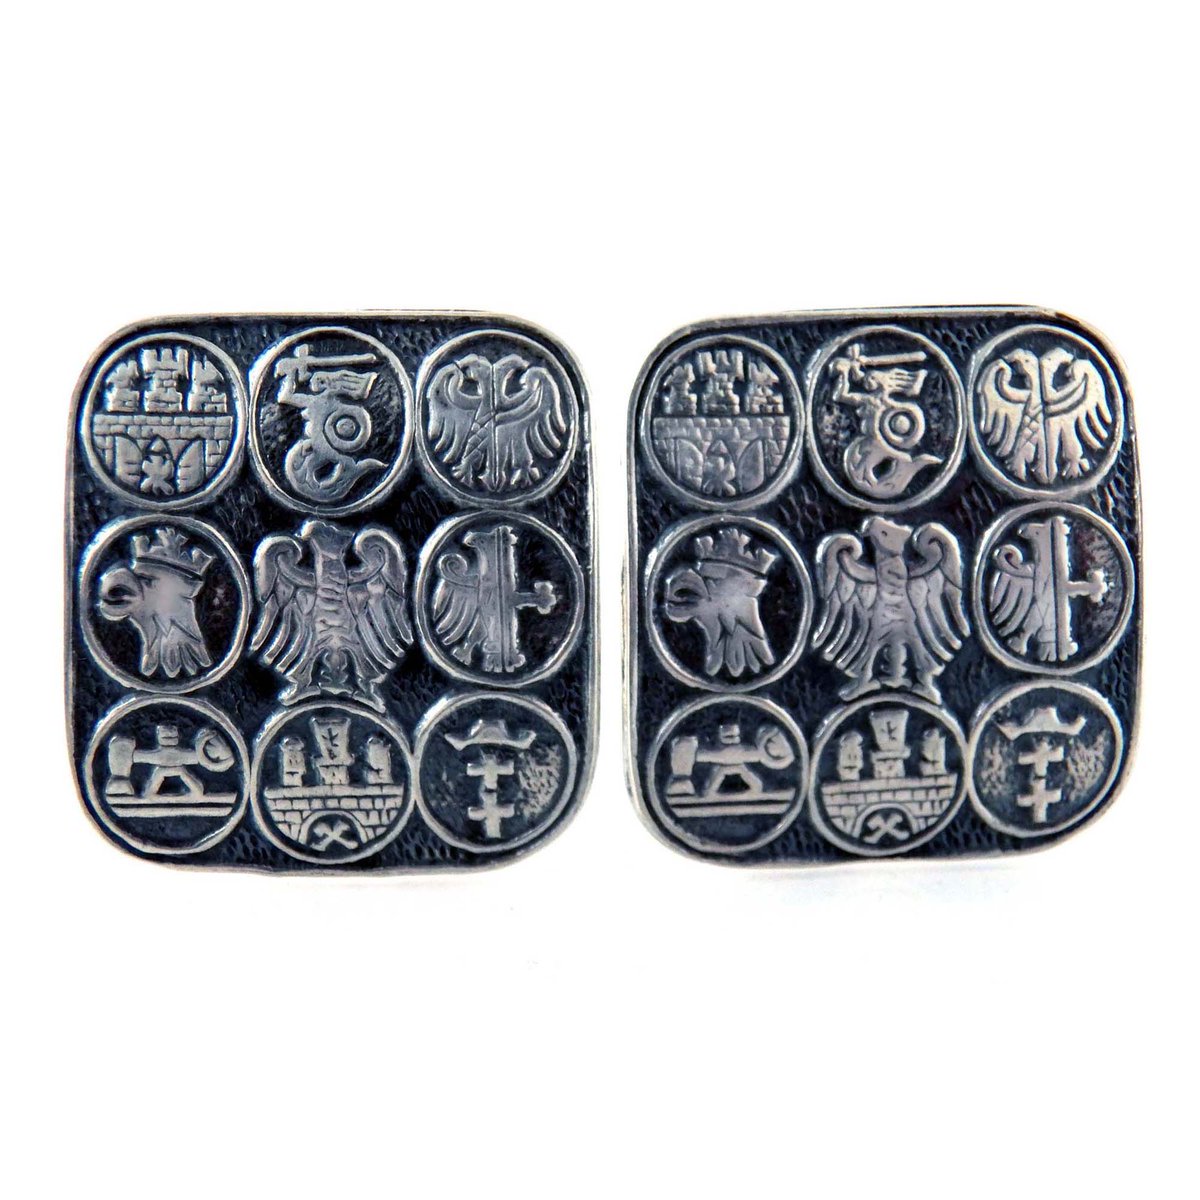 sochicfinds.com/products/large… 
Large Coat of Arms Cufflinks, 800 Silver Heraldic Shield, Vintage Mens Jewelry 1960s #LargeCufflinks #CoatofArmsCufflinks, #800Silver #HeraldicShield, #VintageCufflinks #MensJewelry #1960sCufflinks